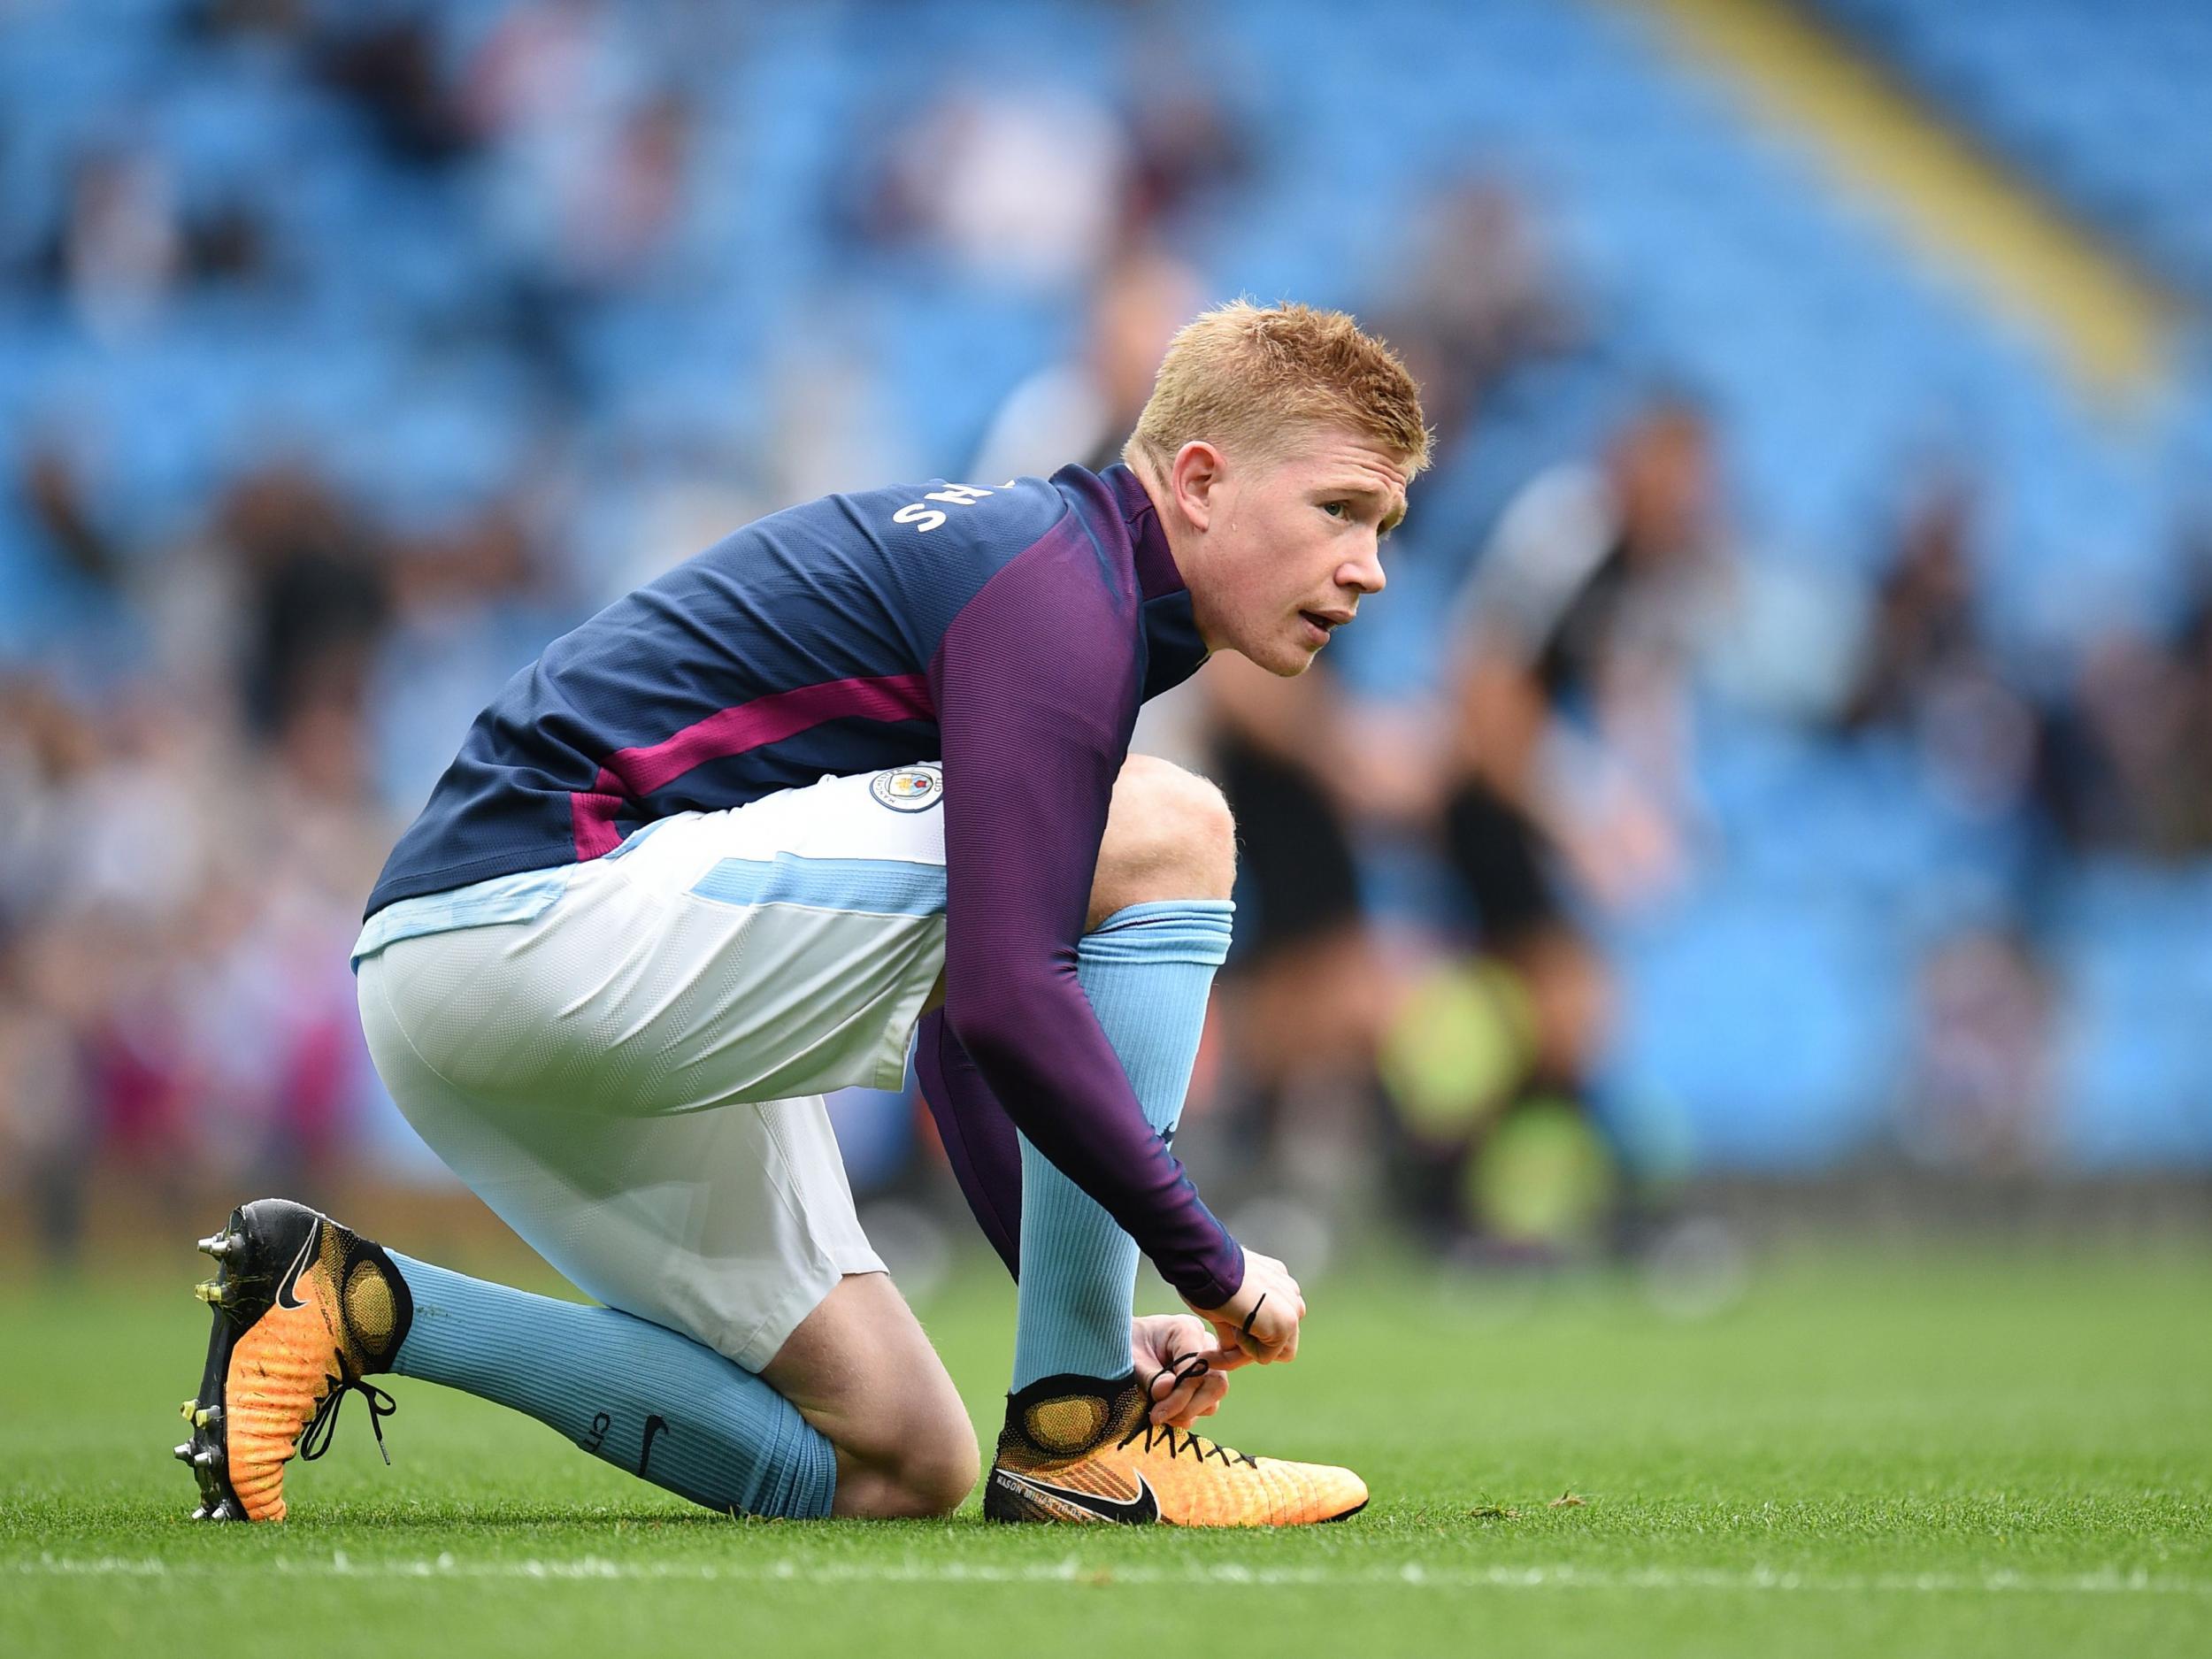 Kevin de Bruyne topped the Premier League assists table last season with 18